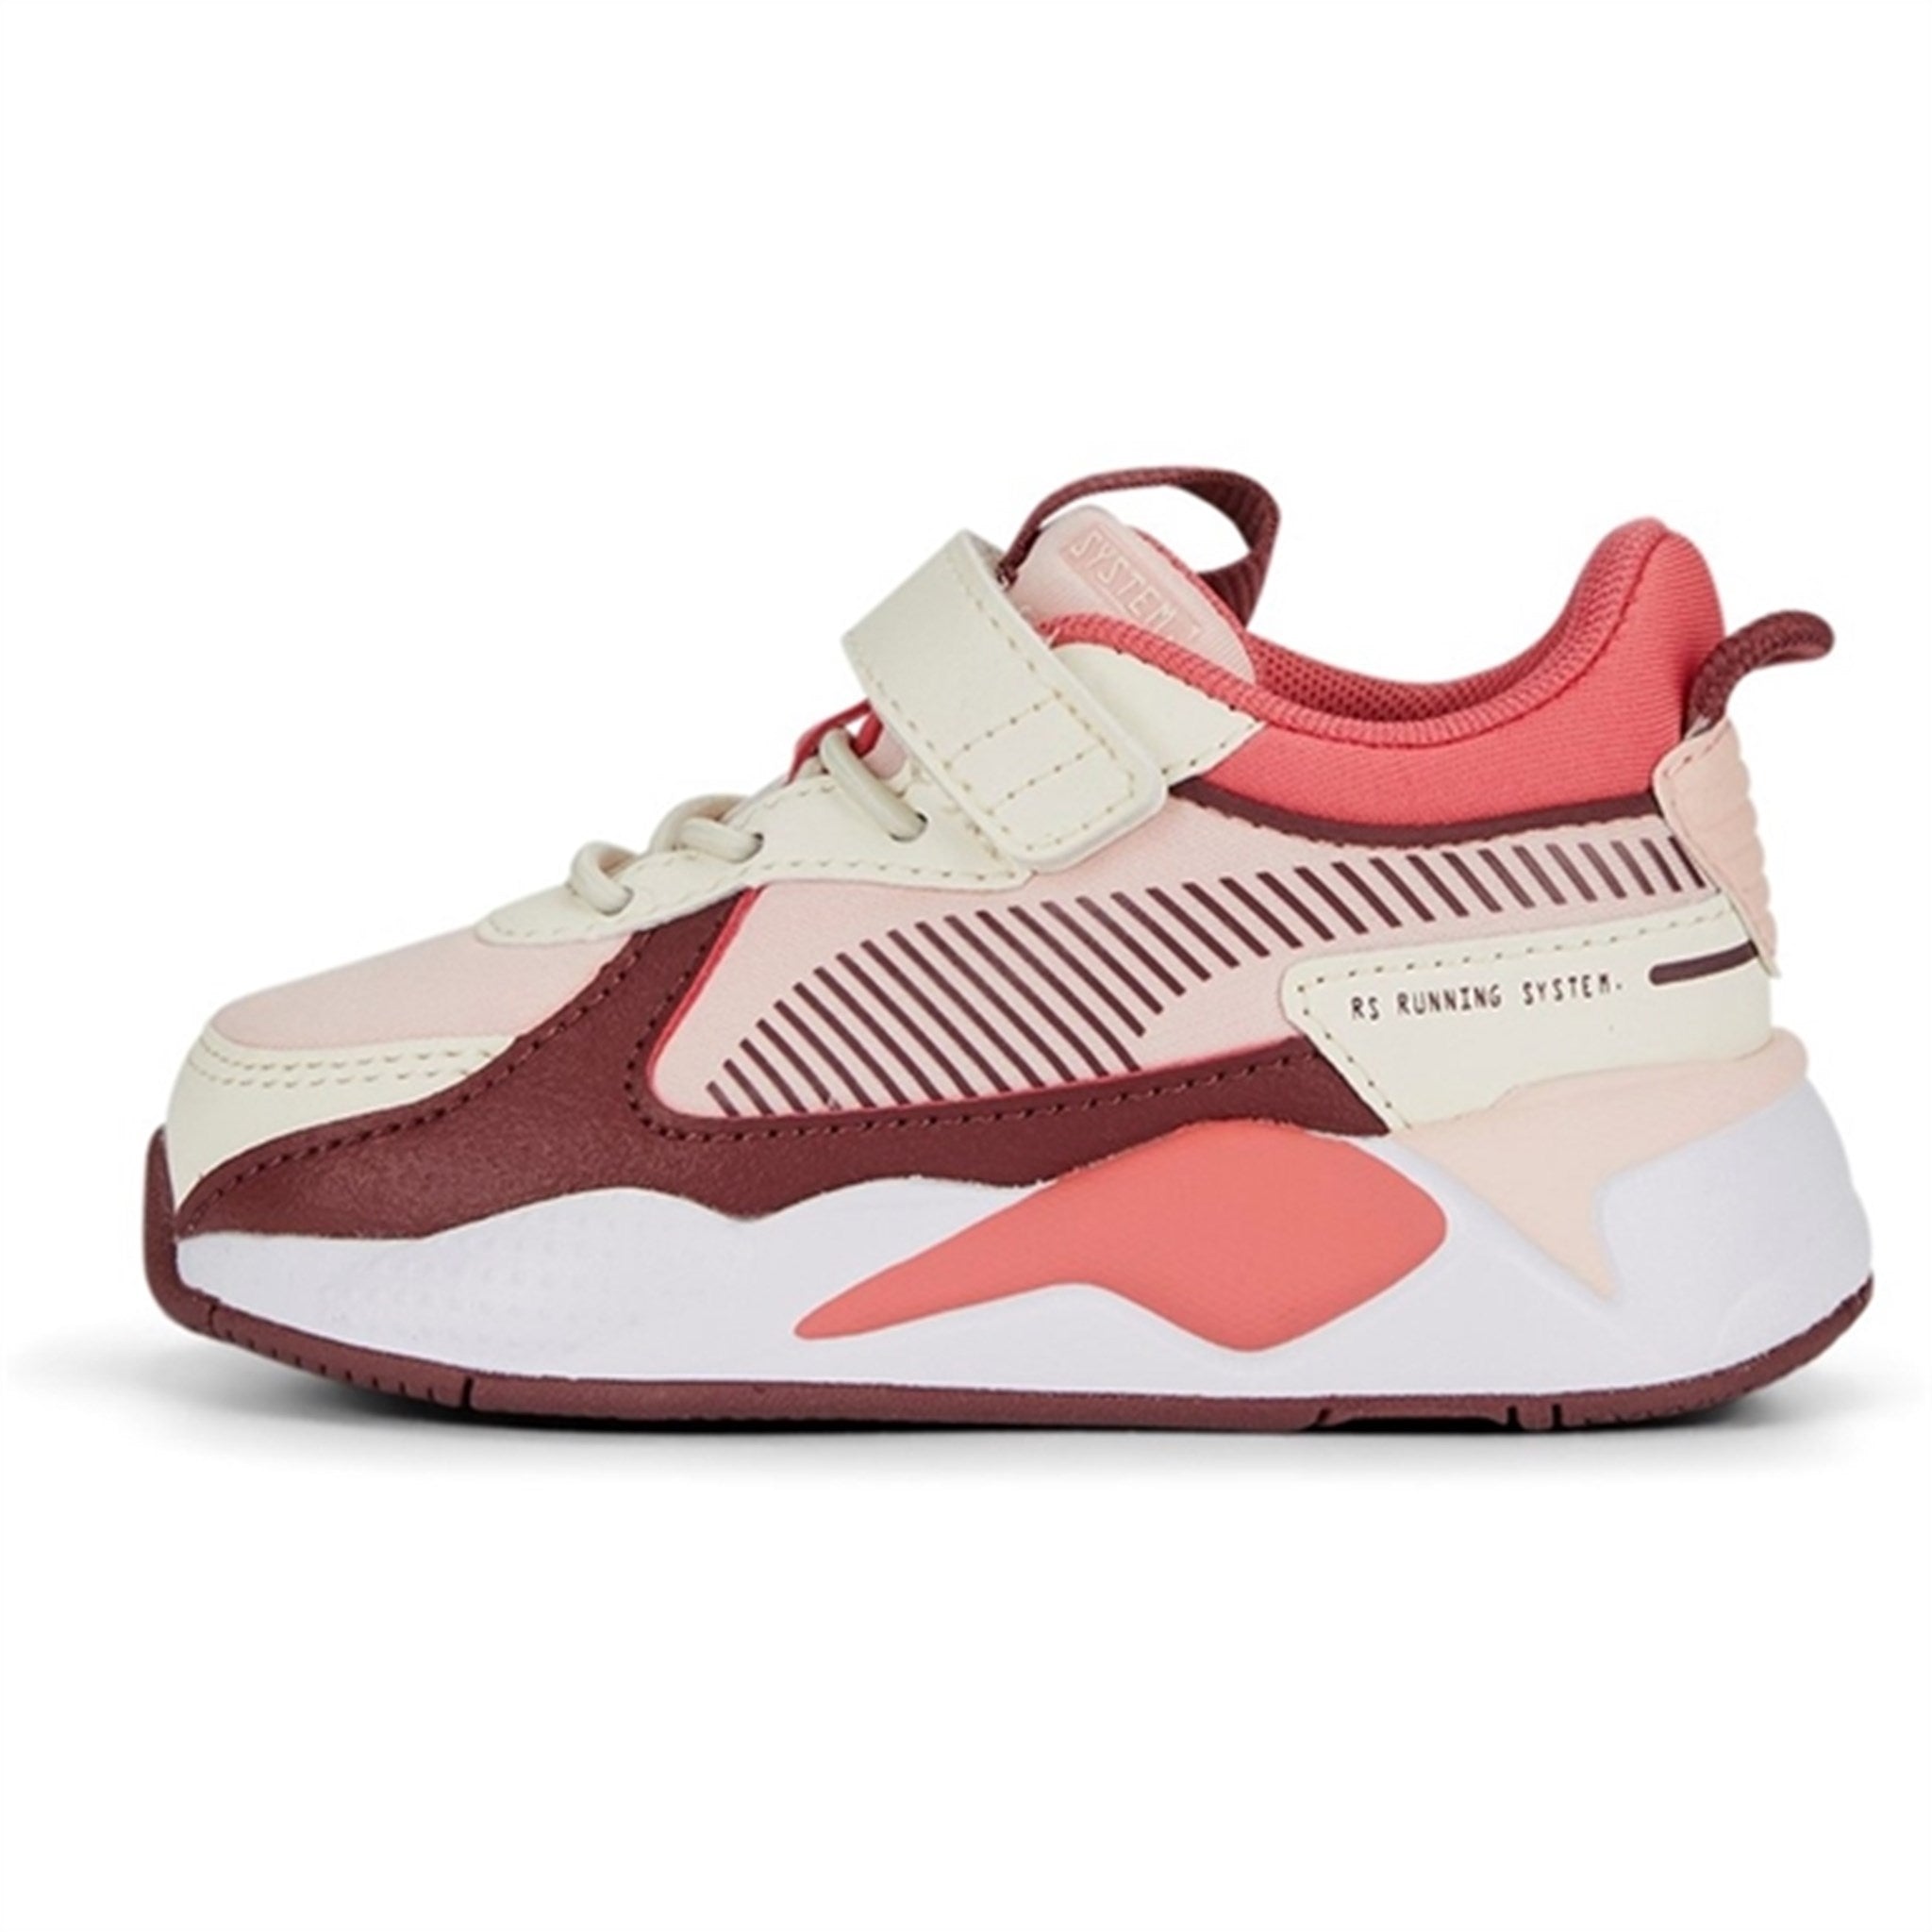 Puma RS-X Dreamy AC+ Inf Rose Dust-Wood Violet Sneakers